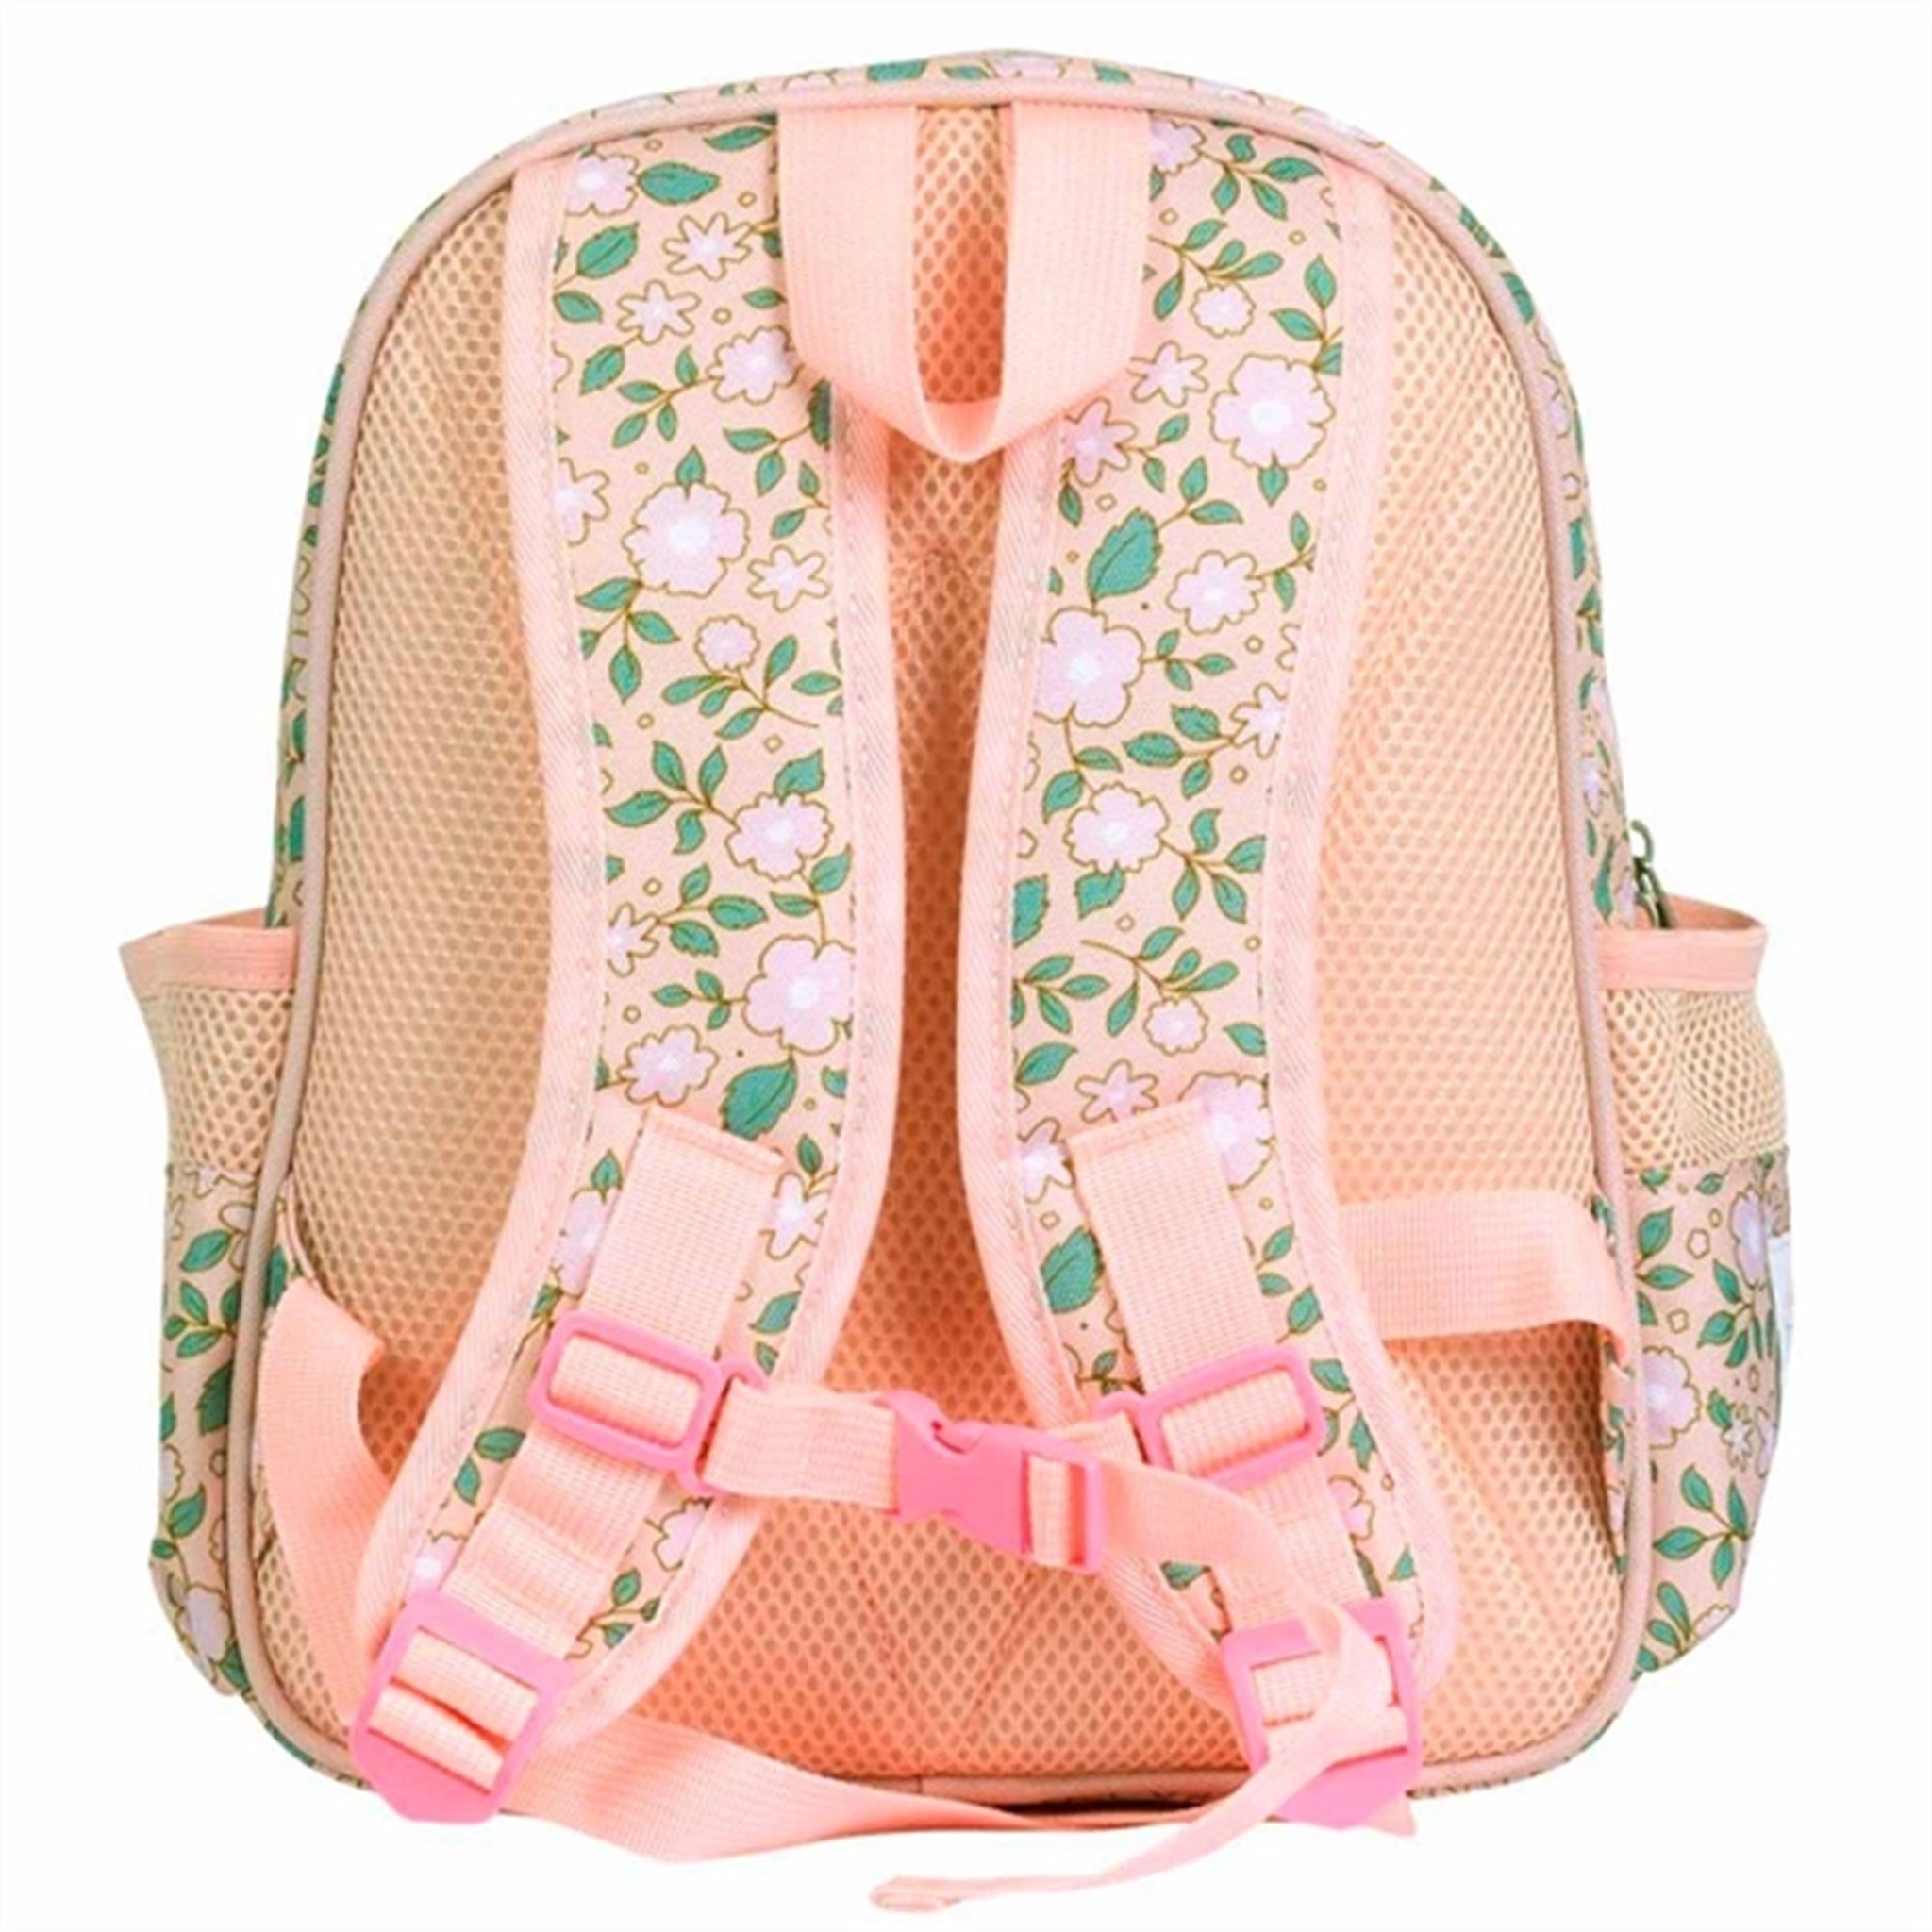 A Little Lovely Company Backpack Blossom Pink 3